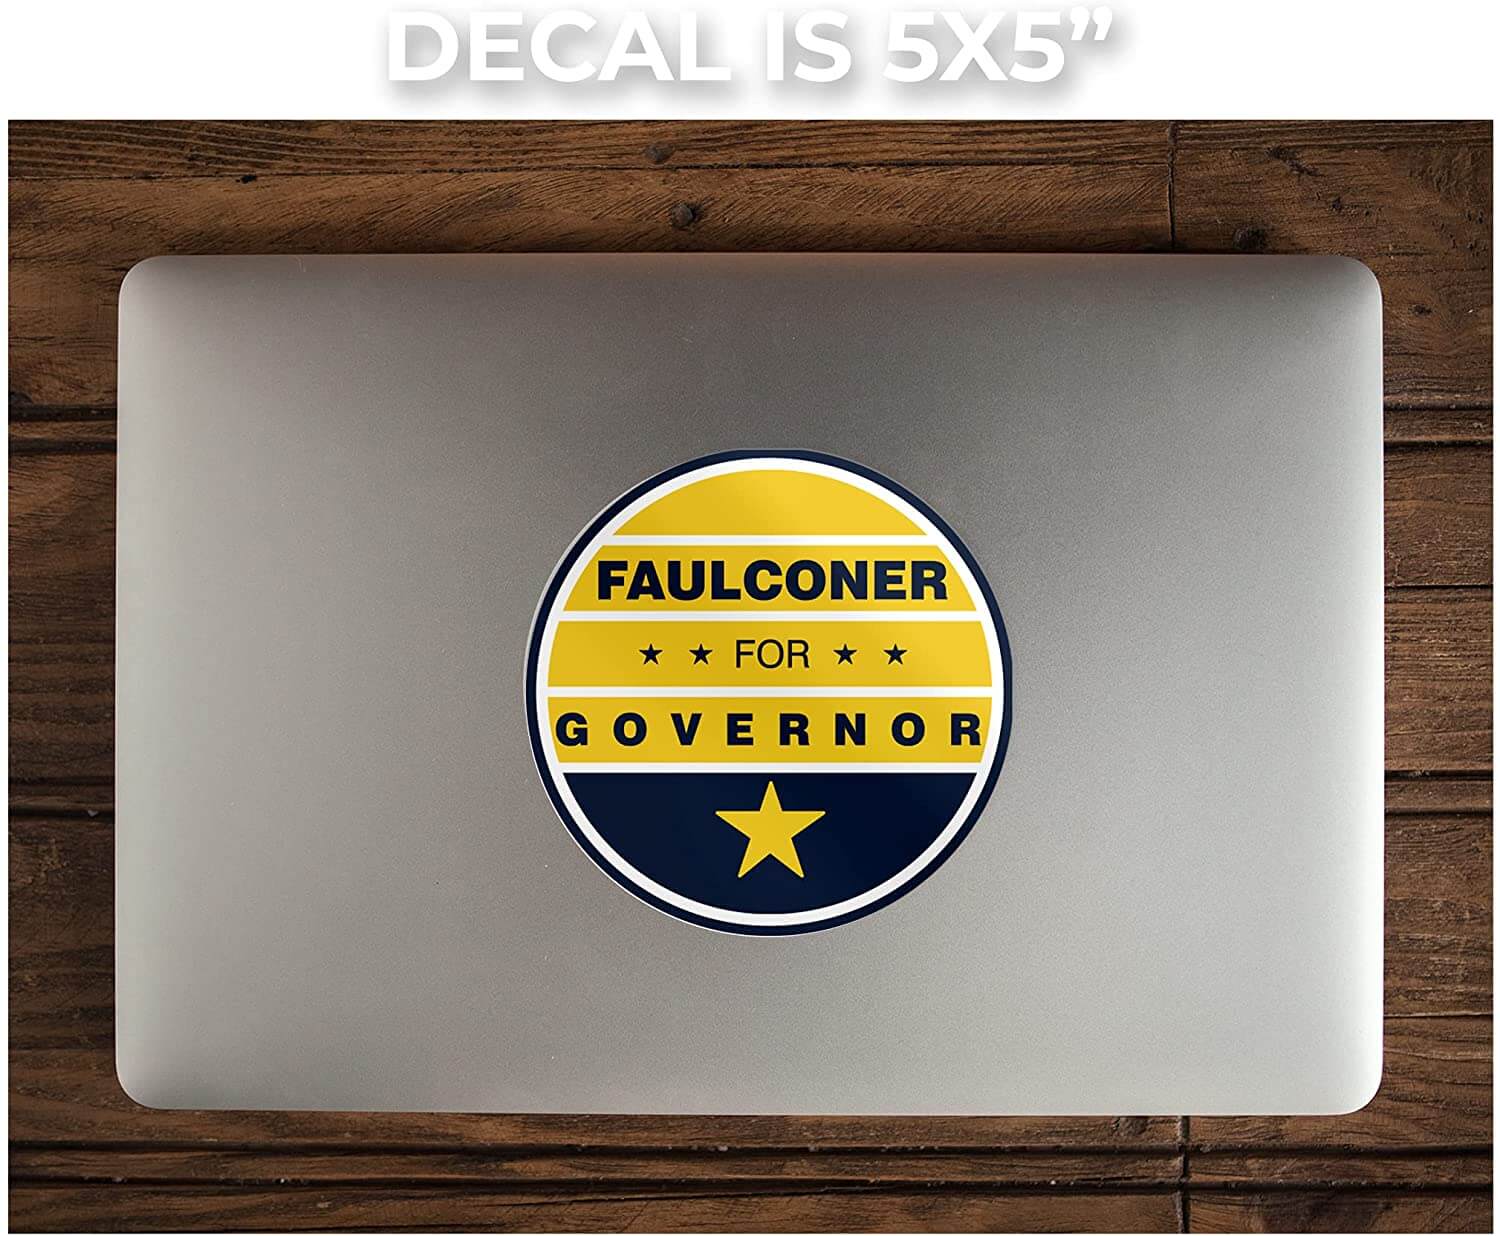 faulconer decal